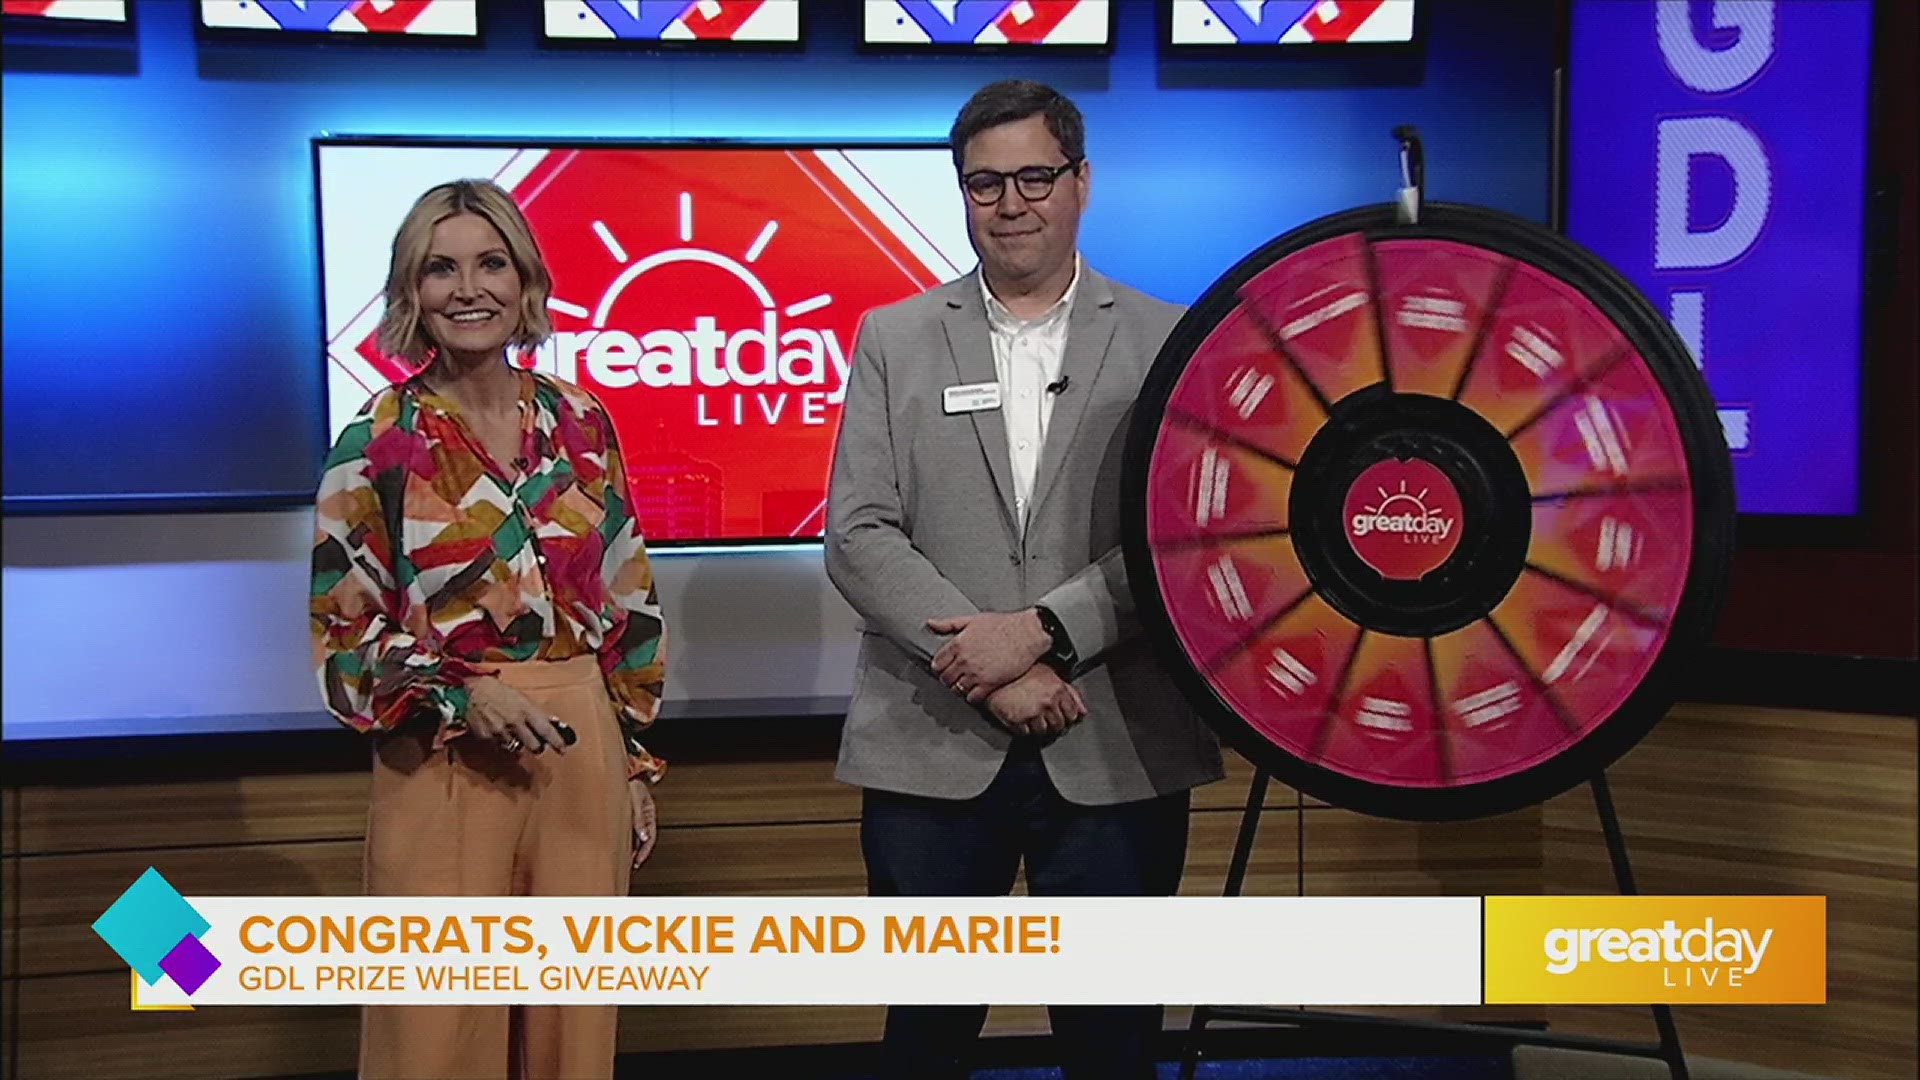 Spin to win prizes from the Great Day Live prize wheel